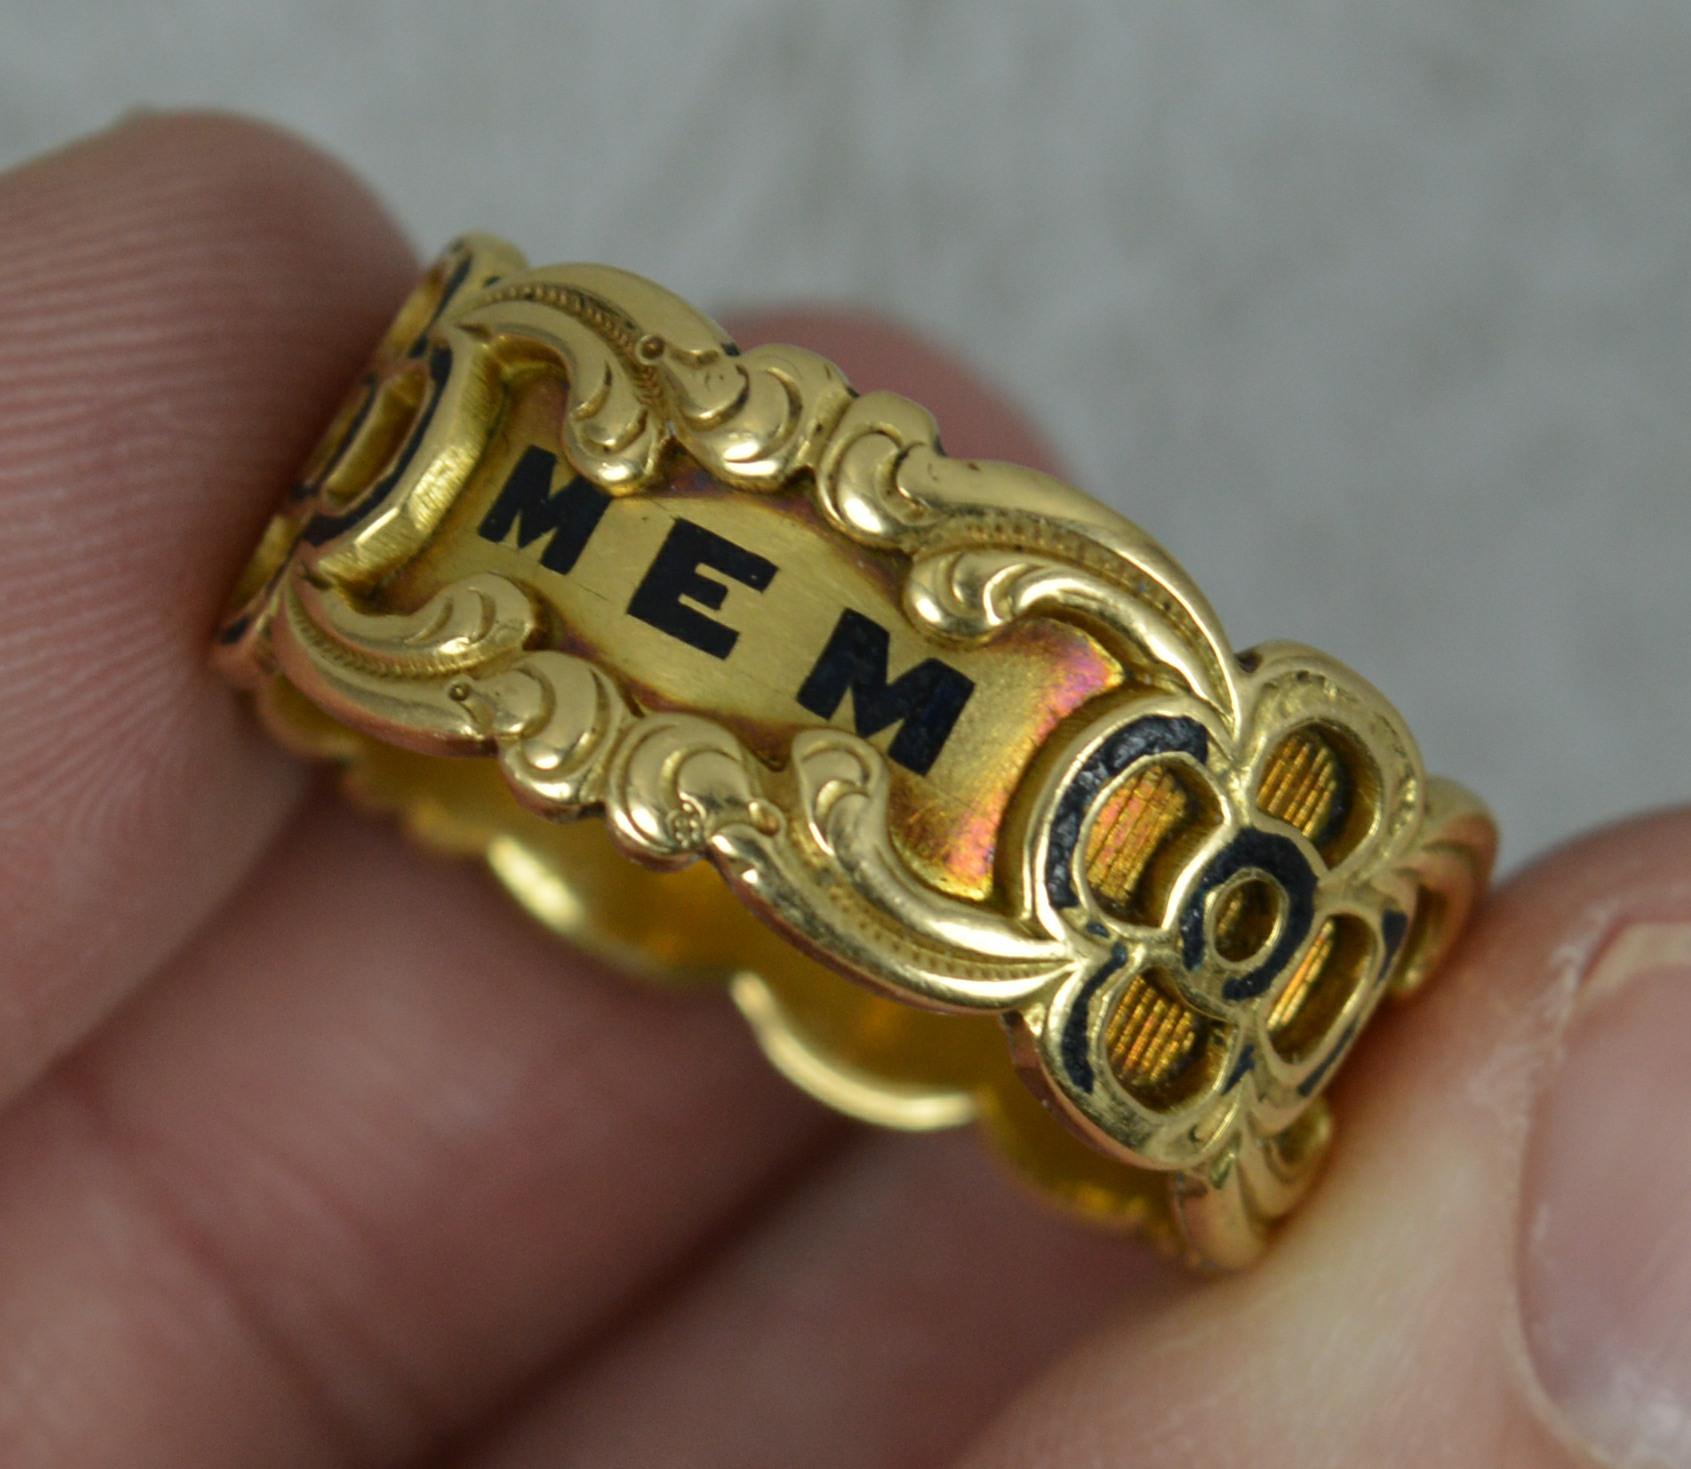 1842 Victorian 18 Carat Gold Enamel In Memory of Mourning Band Ring For Sale 3